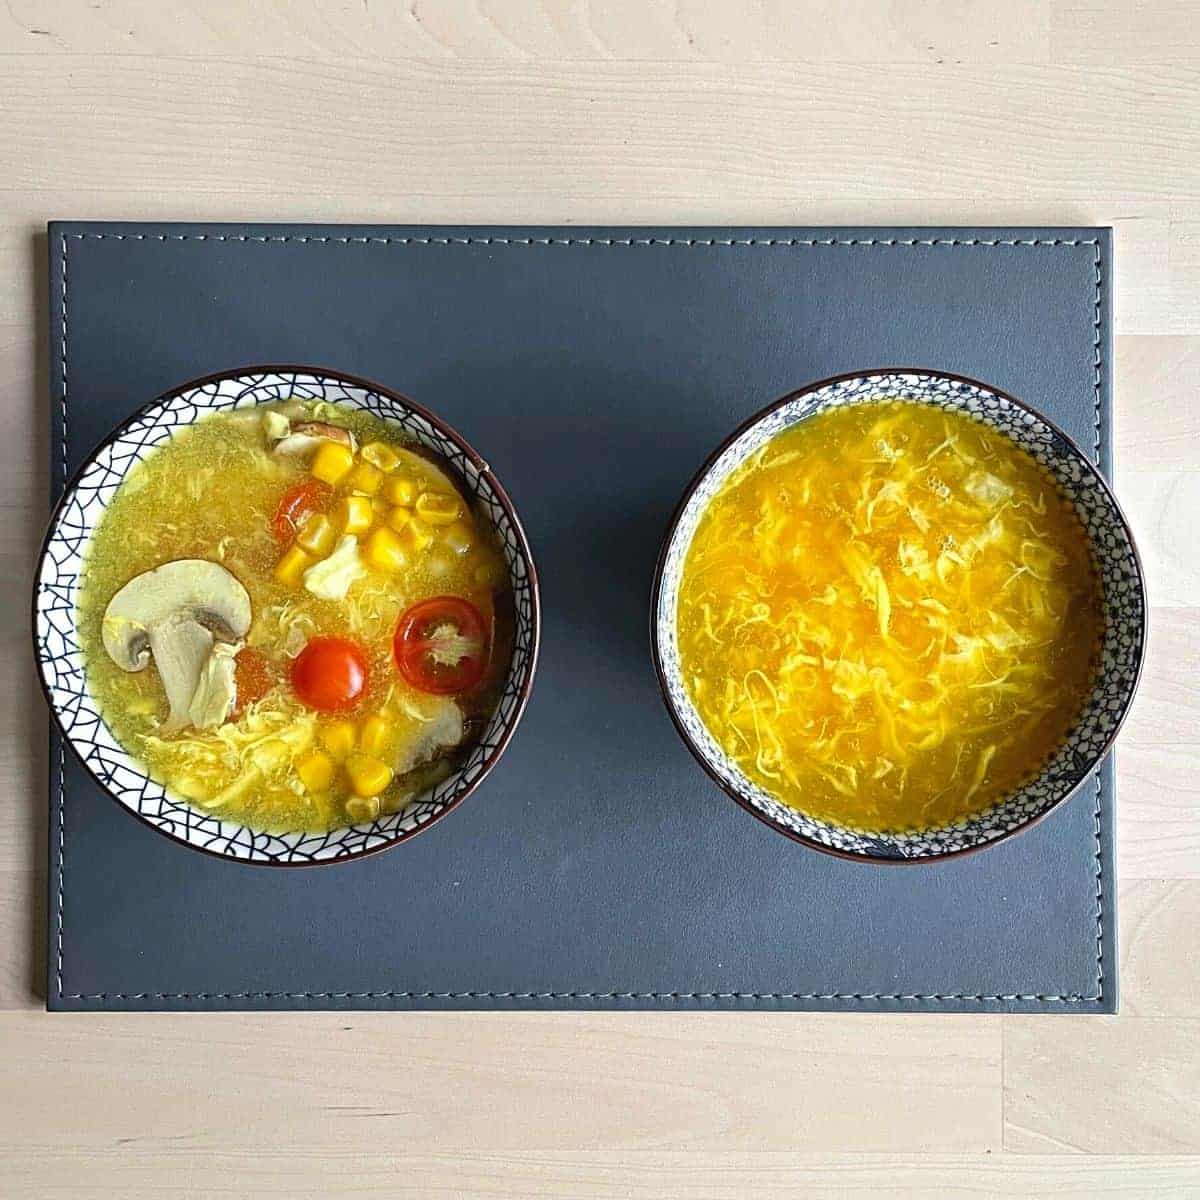 Plain egg drop soup vs with toppings